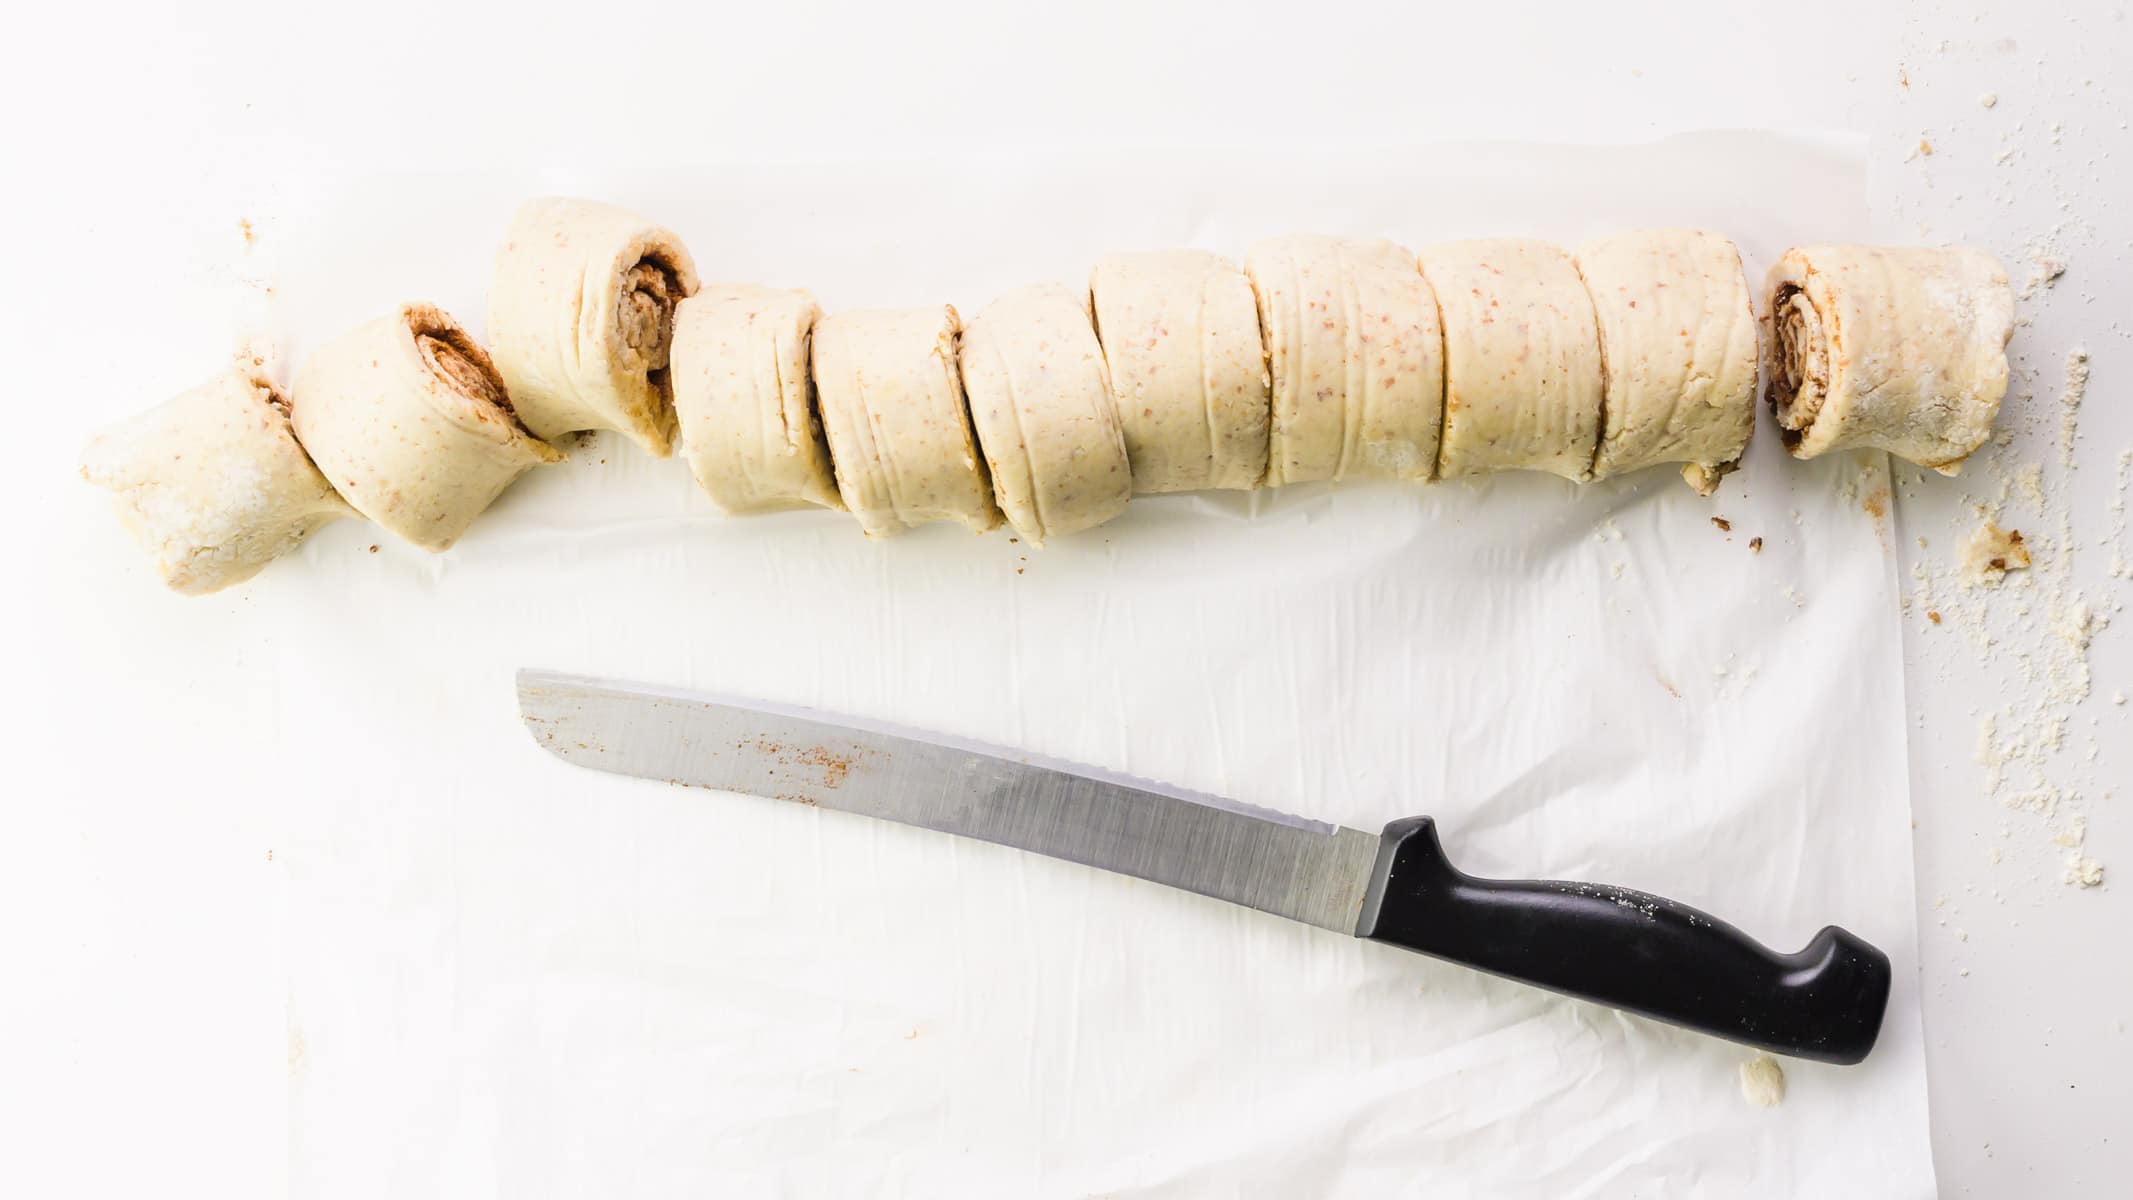 A serrated knife sits below a log of dough that has been sliced into a number of rolls.